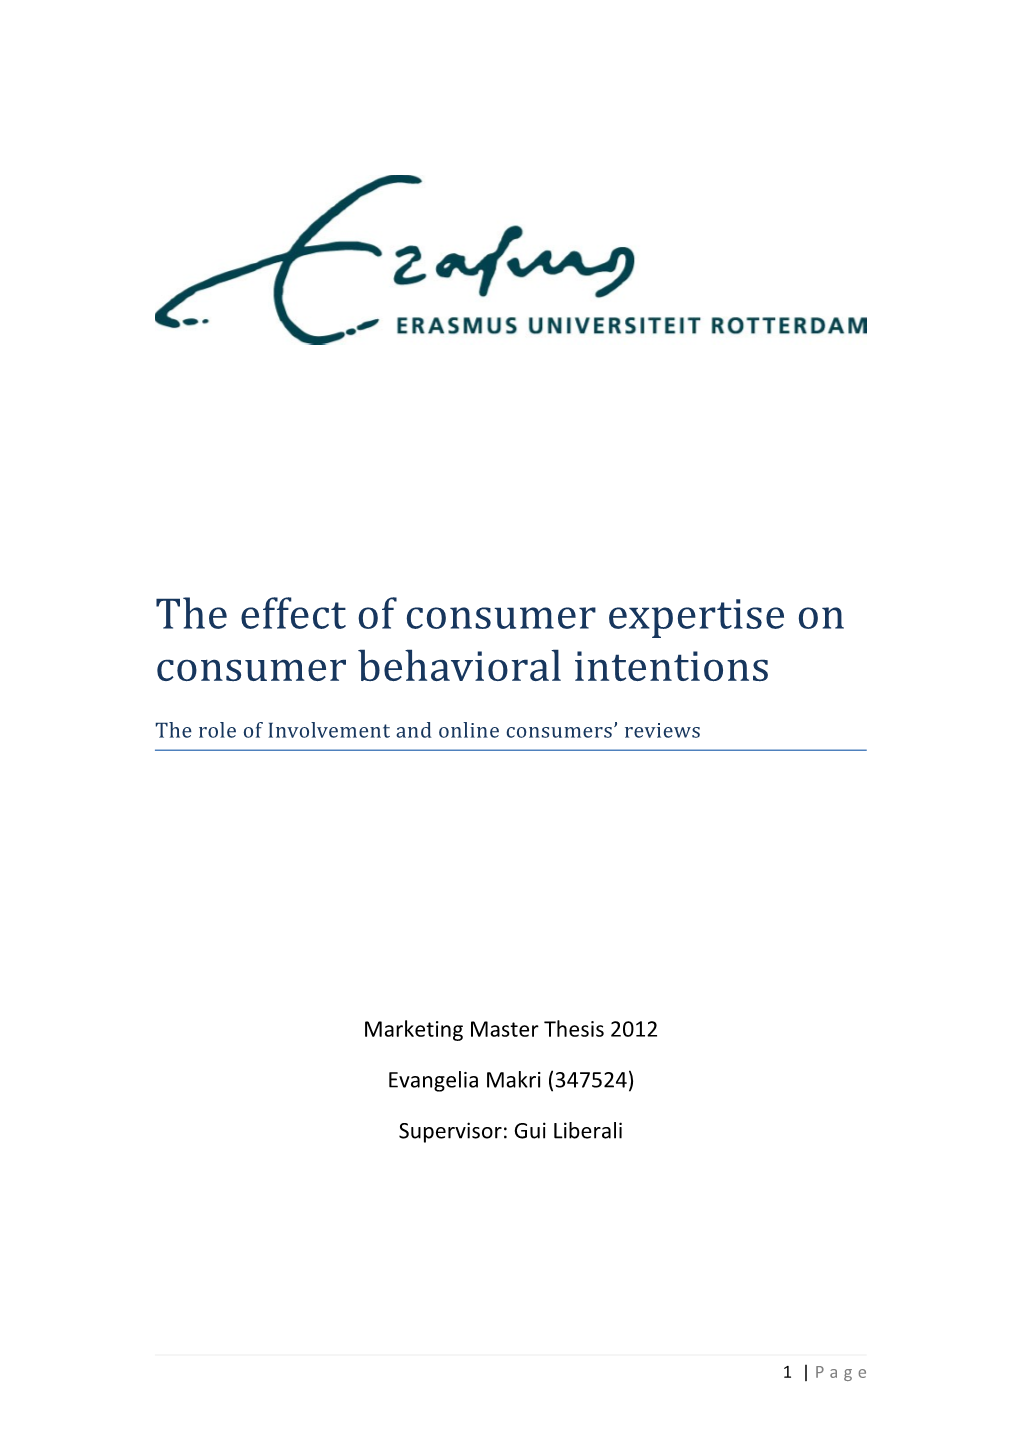 The Effect of Consumer Expertise on Consumer Behavioral Intentions